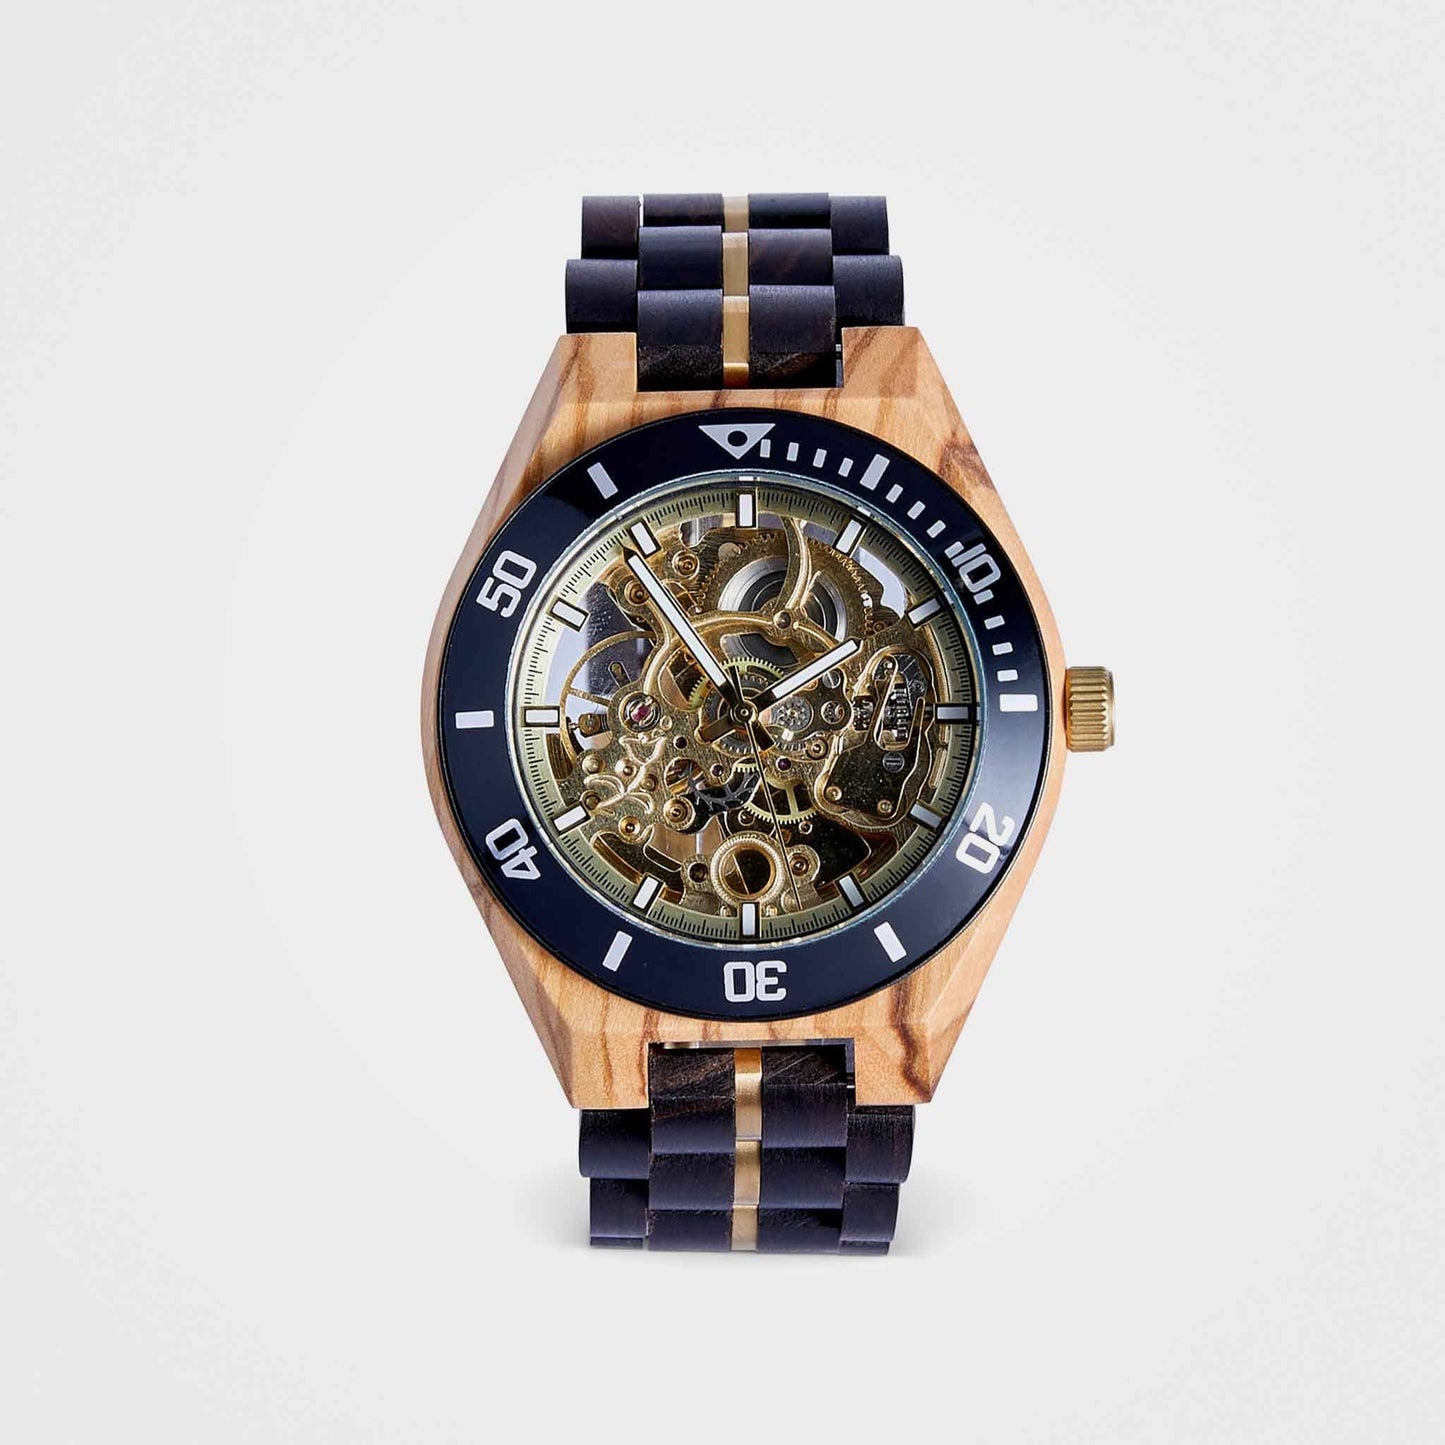 Recycled Wood Watch For Men: The Rosewood